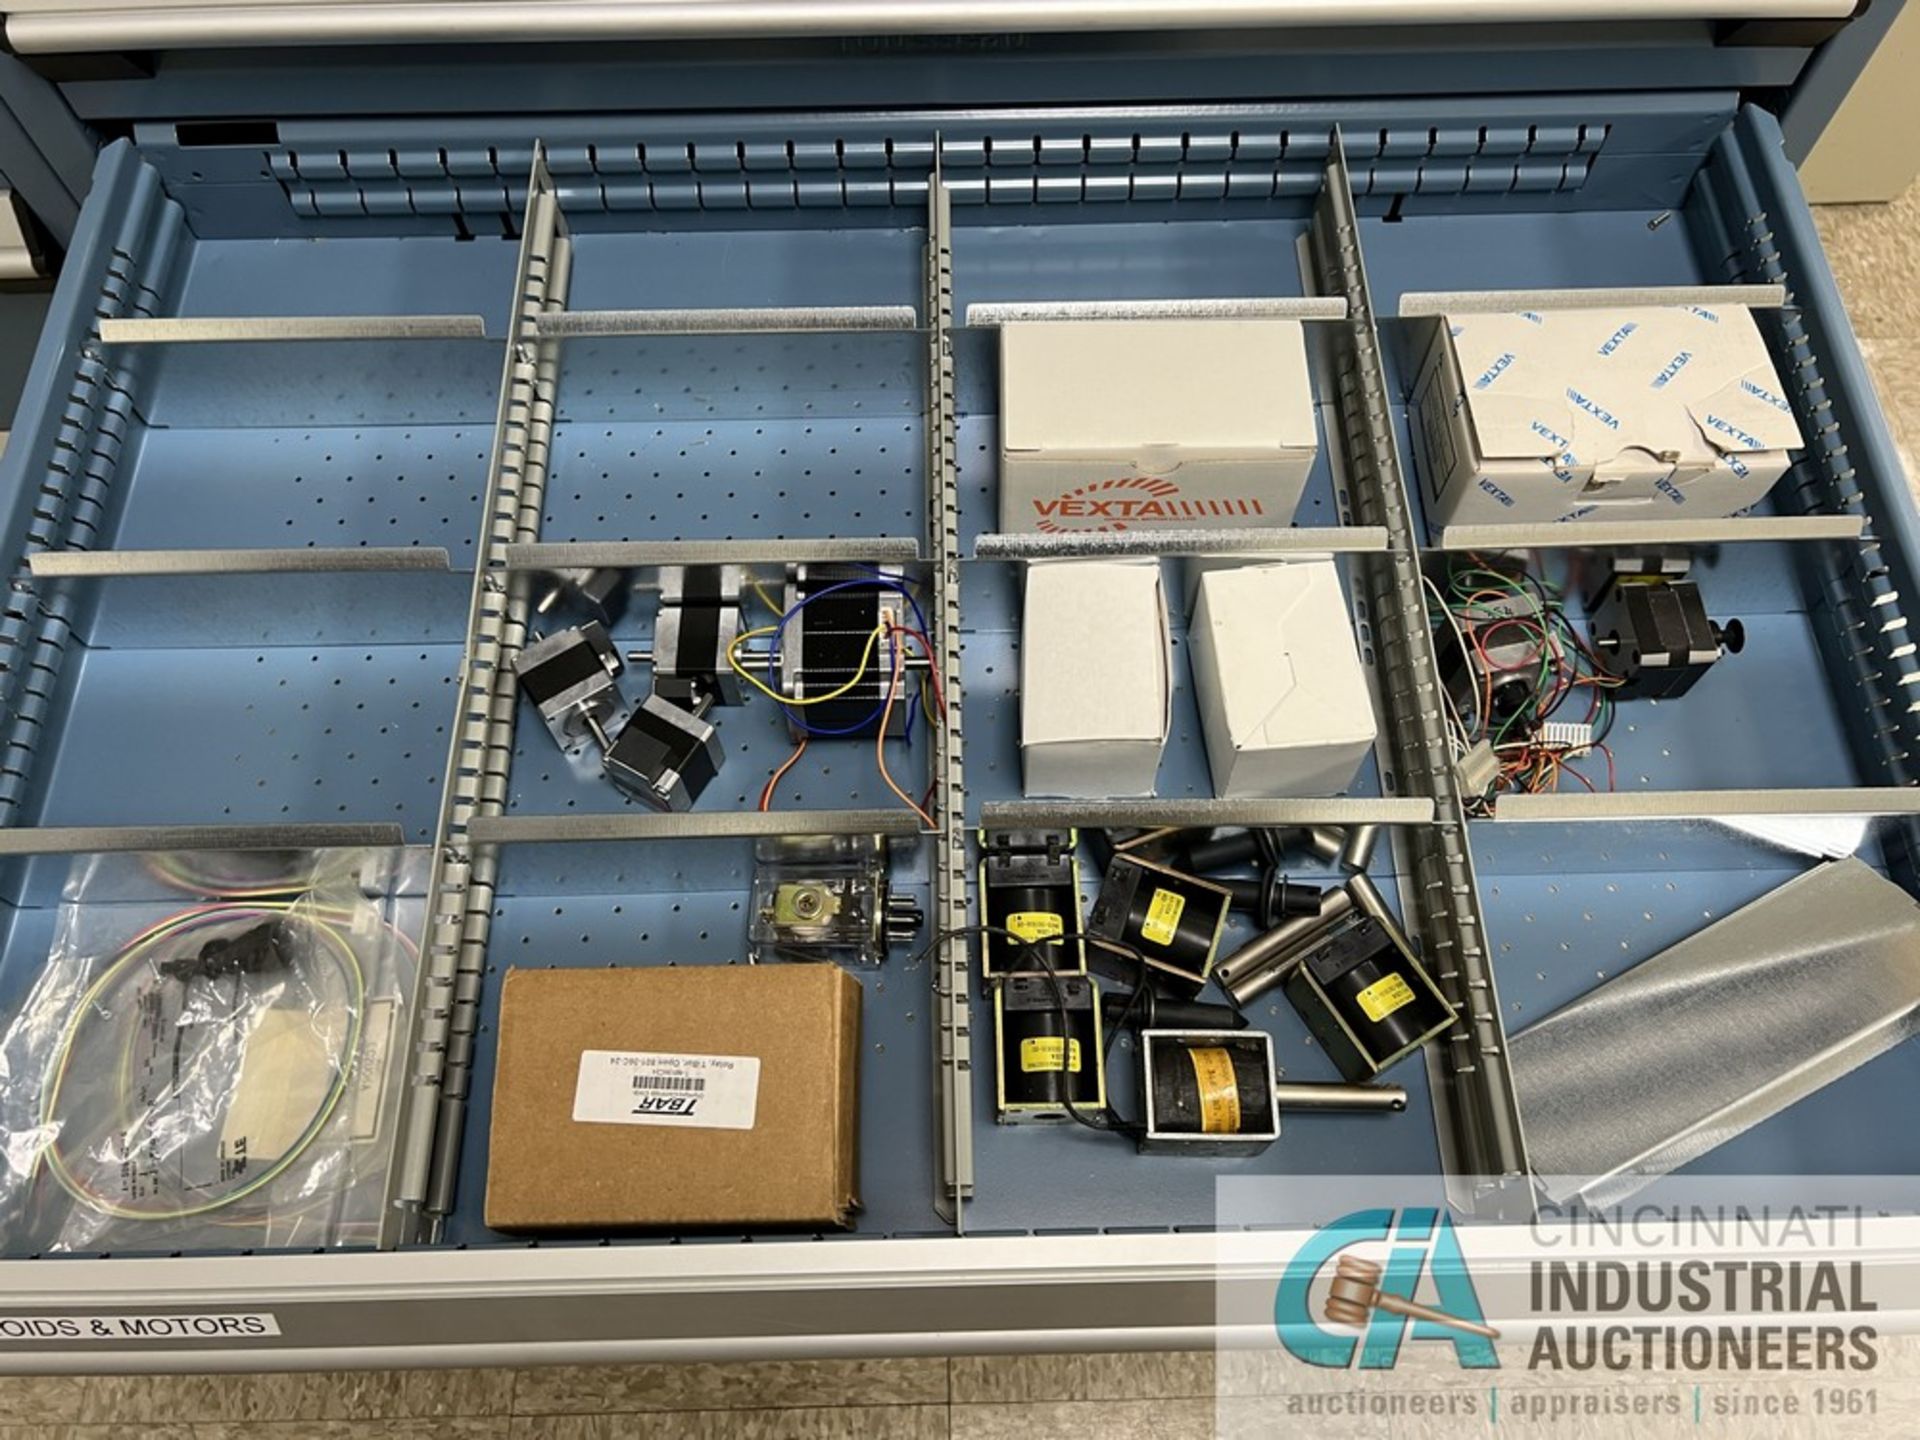 14-DRAWER ROUSSEAU PARTS CABINET WITH CONTENTS INCLUDING WIRING, CONNECTORS, SOLENOIDS, MOTORS, - Image 12 of 15